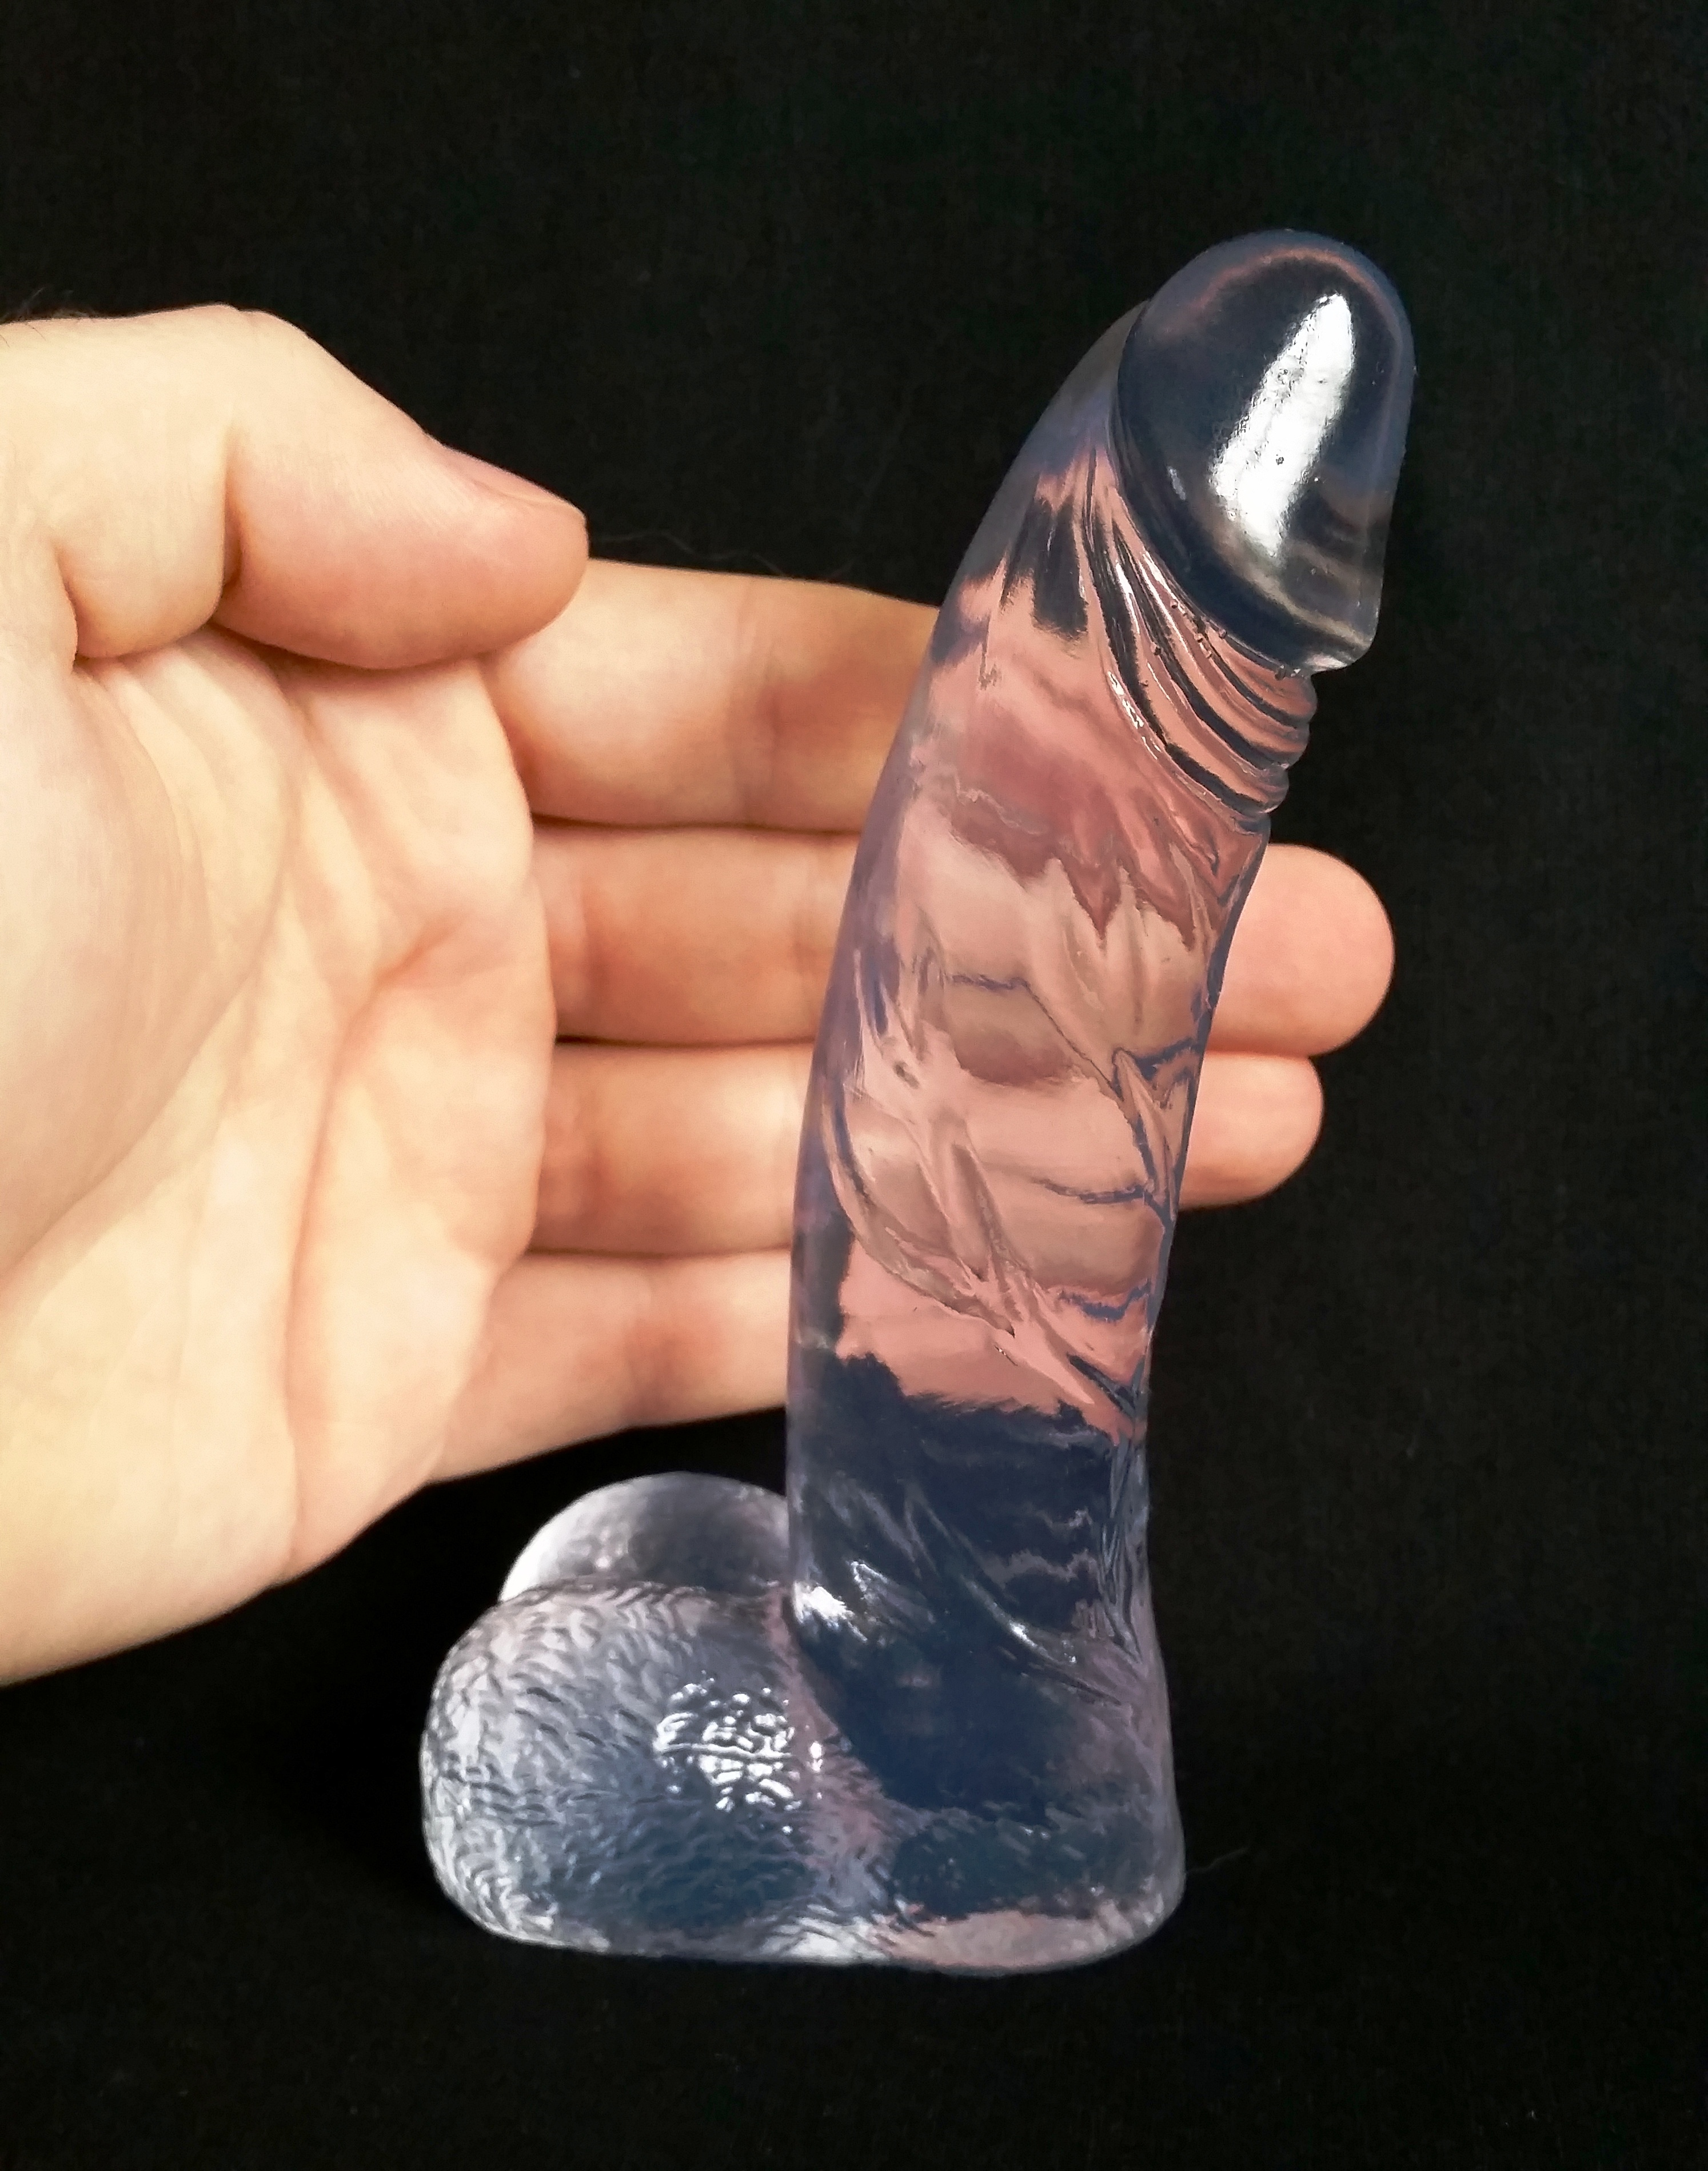 dildo to a give woman birth